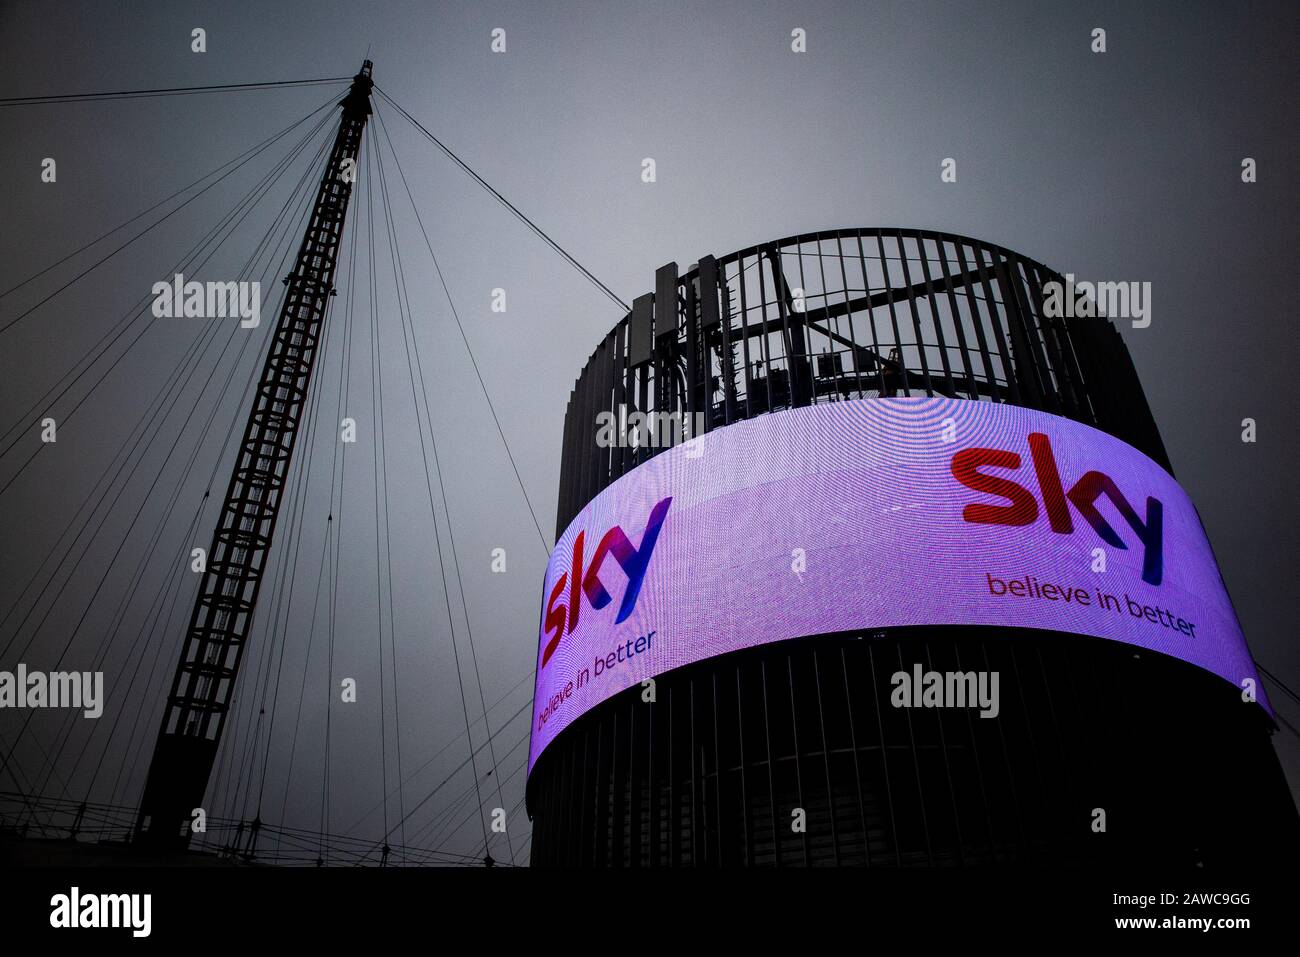 The exterior of the O2 Millennium Dome in North Greenwich, London with an electronic advertising hoarding from Sky Stock Photo